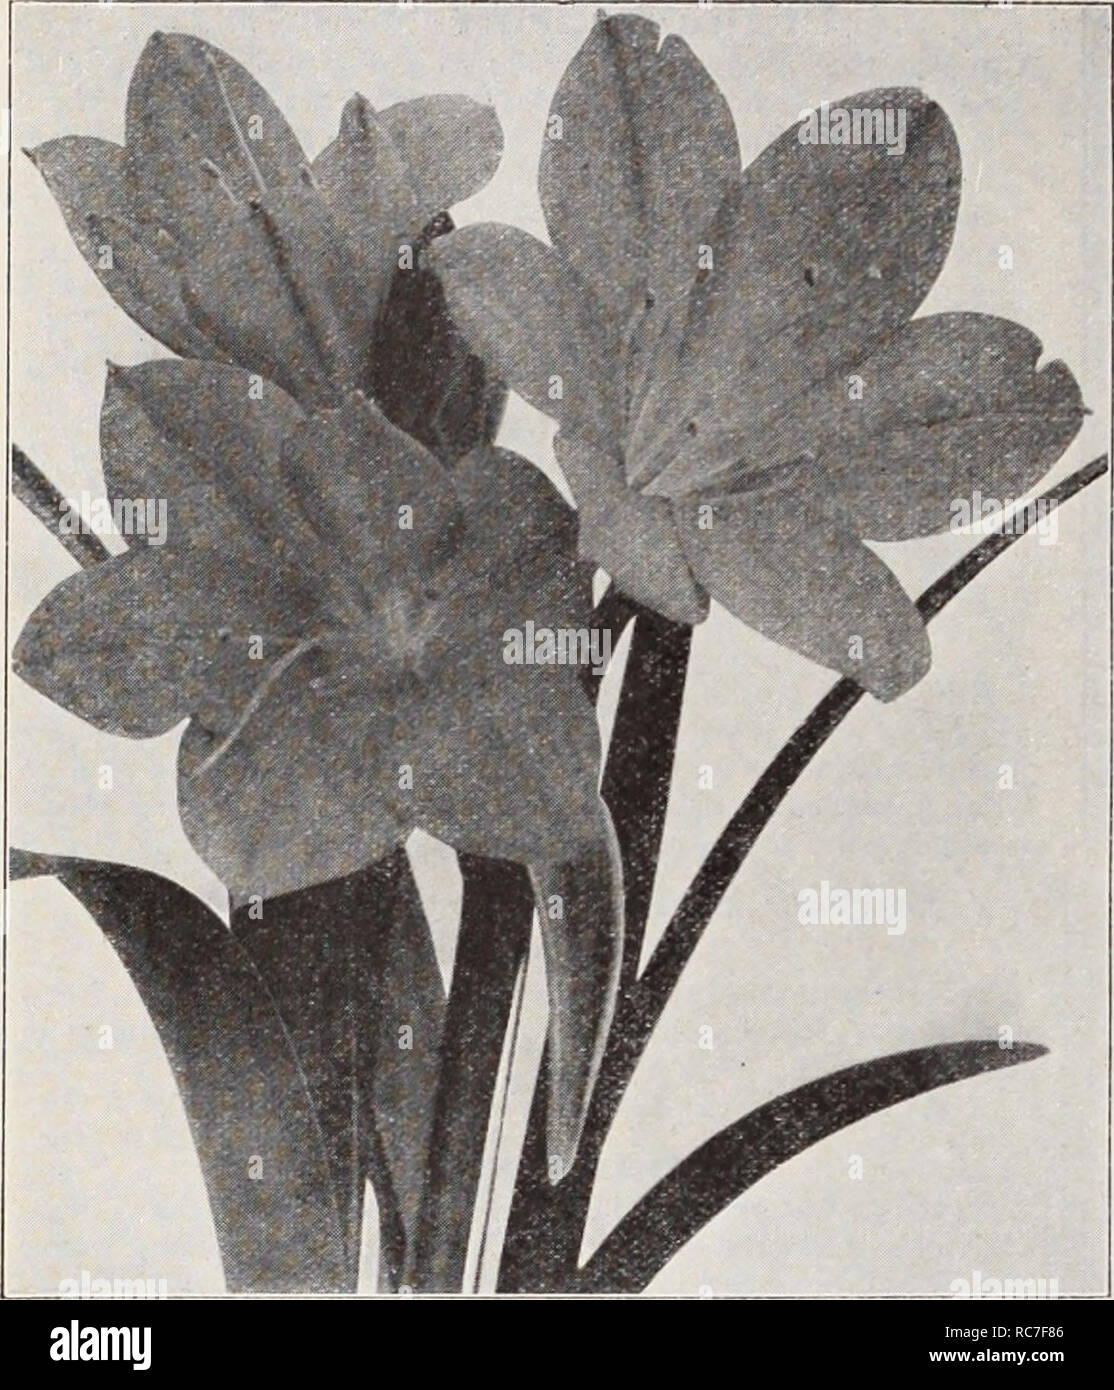 . Dreer's garden book / Henry A. Dreer.. Nursery Catalogue. GARDEN&quot;&quot;&quot; GREENHOUSE PLANTS 7PHn»Hii. Vallota Speciosa (Scarborough Lily) For Summer Flowering Bulbs such as Amaryllis, Tuberous Rooted Begonias, Fancy Leaved Caladiums, Gloxinias, Lilies, Montbretias, Tigridias, Tuberoses, etc., see pages 138 to 141. Stigmaphyllon Ciliatum (Brazilian Golden, or Orchid Vine) One of the prettiest tender climbers in cultivation, with large yellow, orchid-like flowers, produced very freely during the summer months. It is especially adapted for training over the pillars or on the wall of a Stock Photo